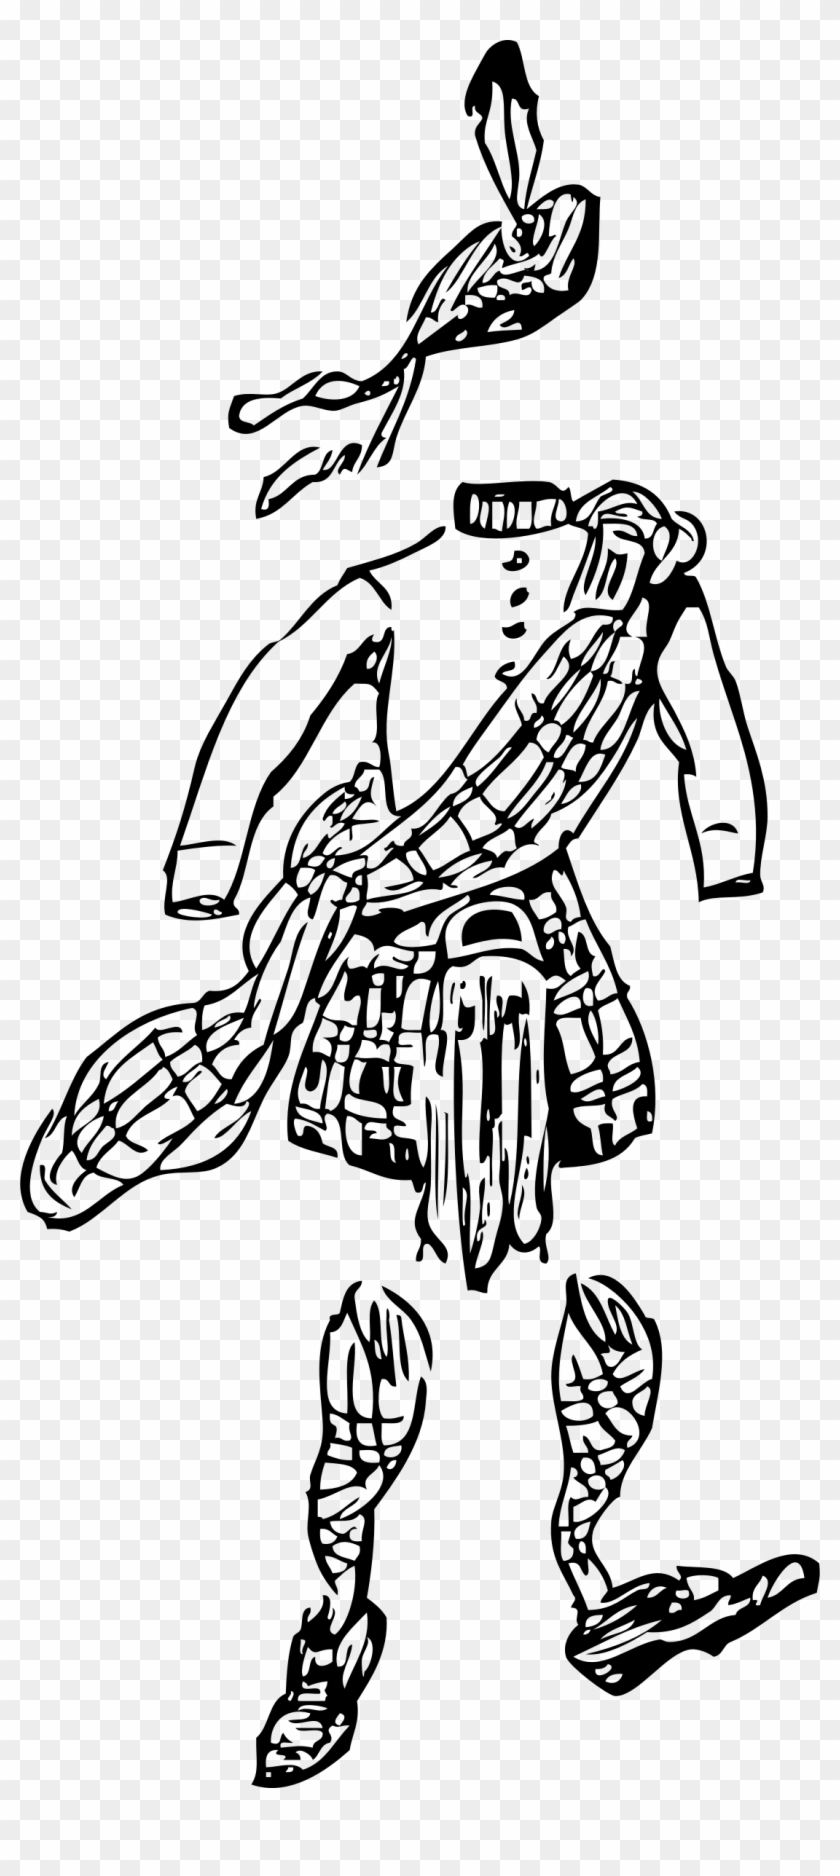 This Free Icons Png Design Of Scotsman's Clothes - Illustration Clipart #5448938